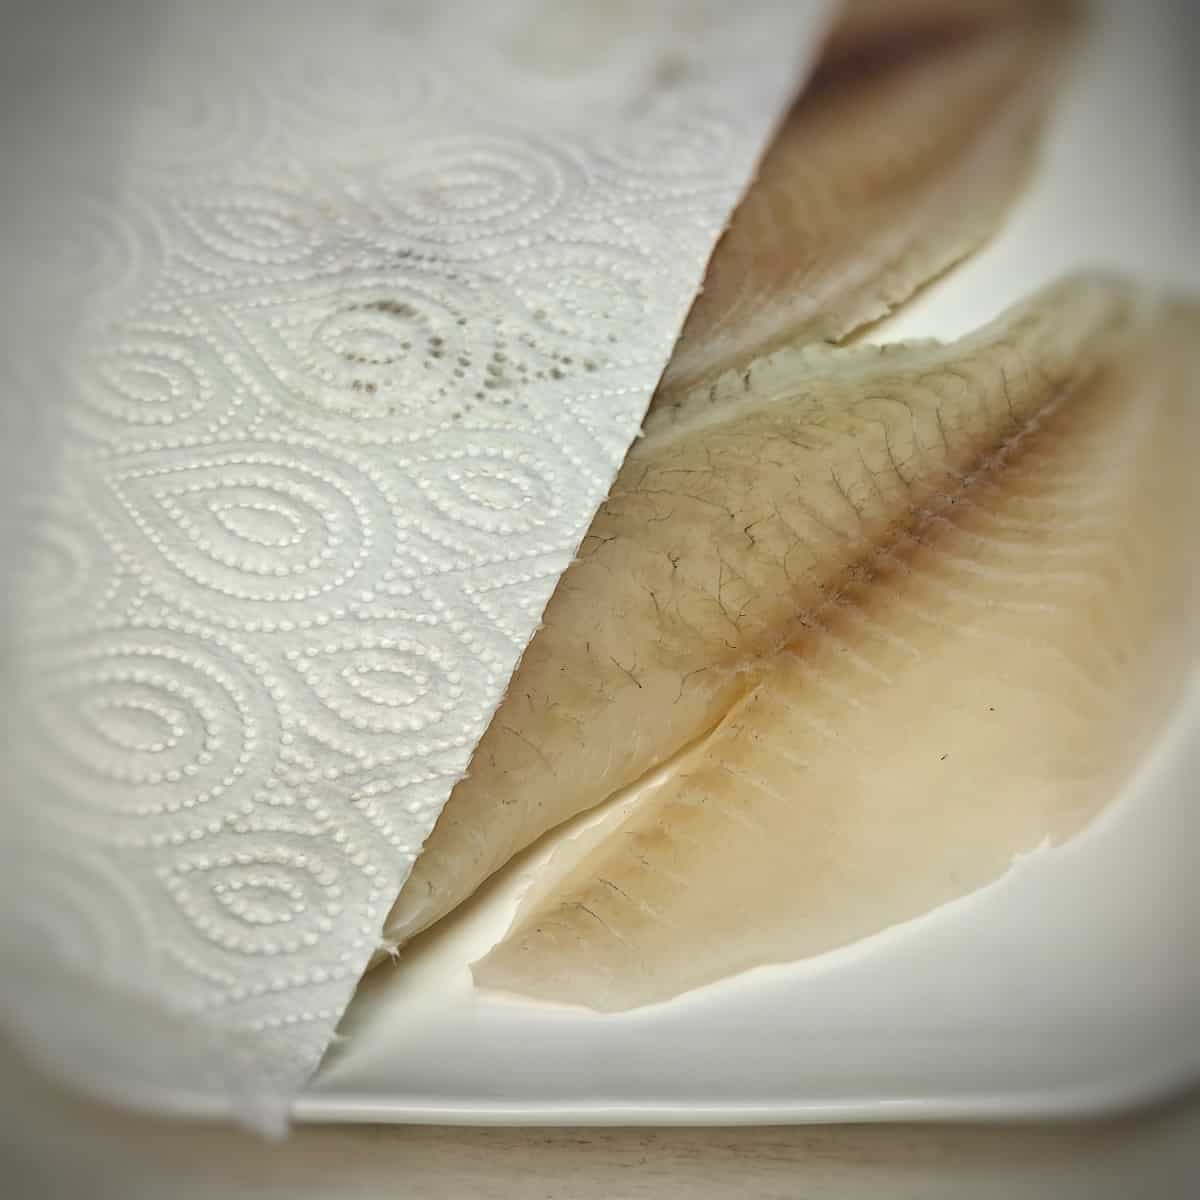 tilapia fillets with paper towel